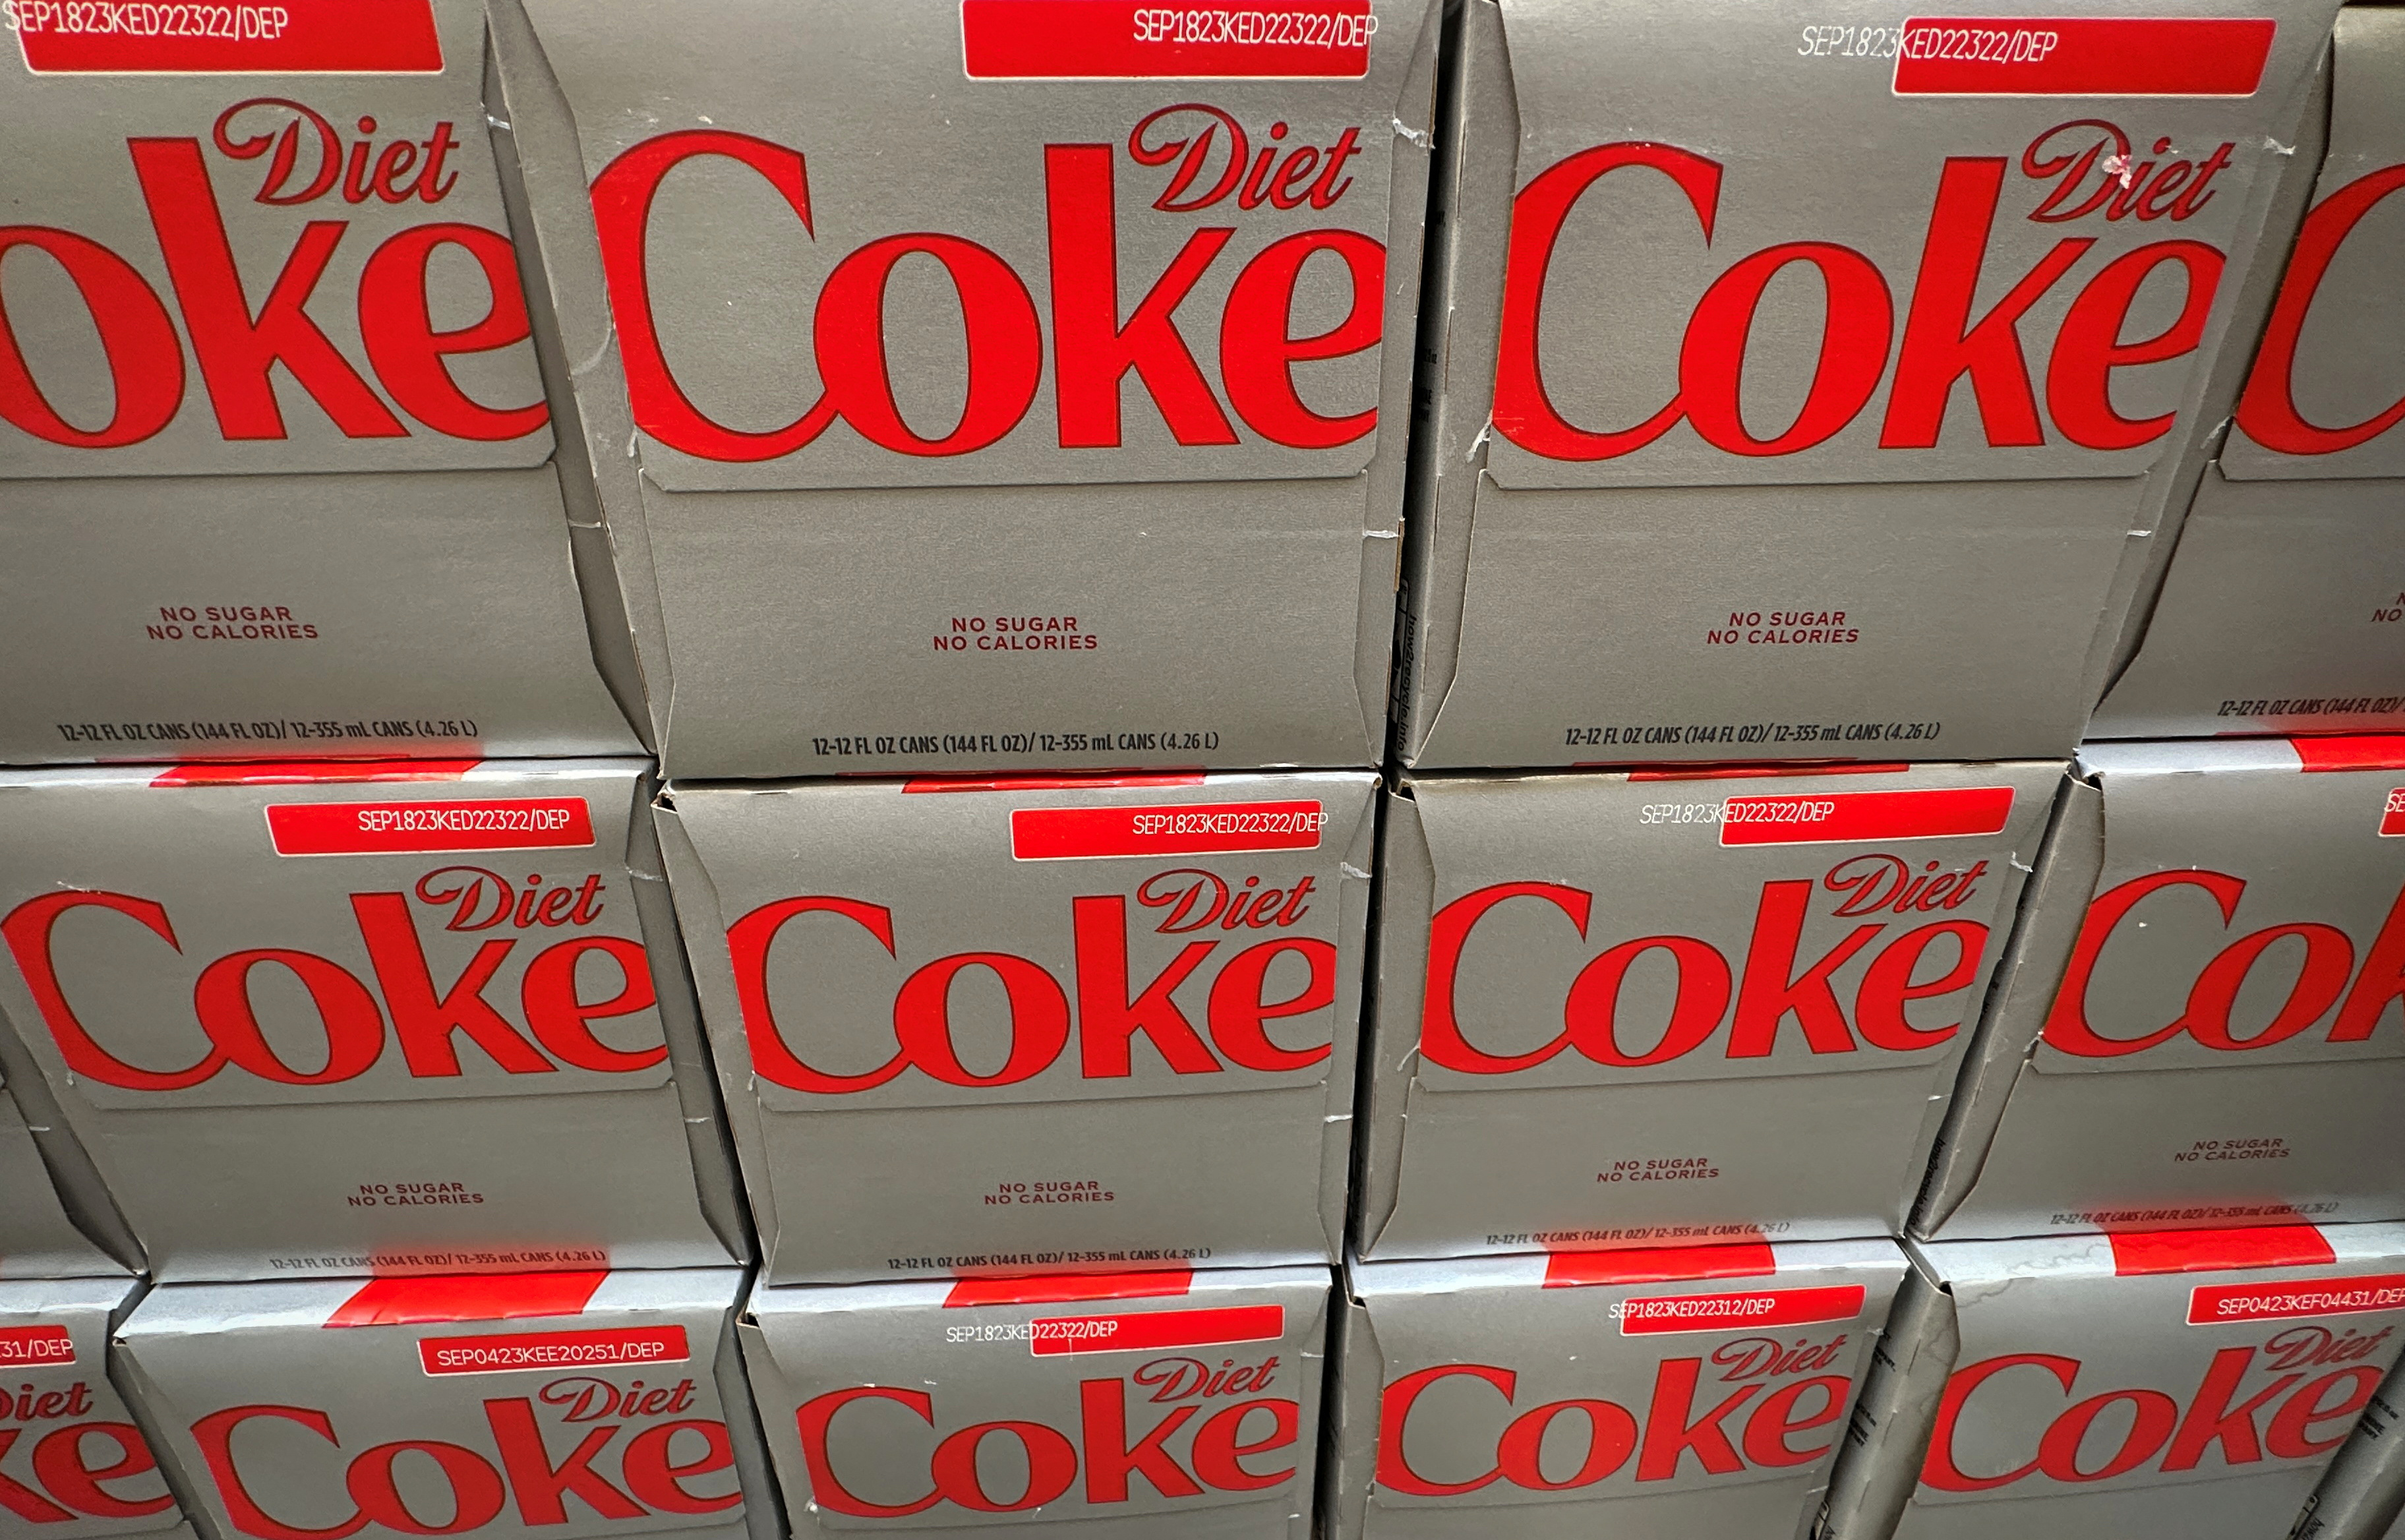 Packages of Diet Coke are seen on display at a market in New York City